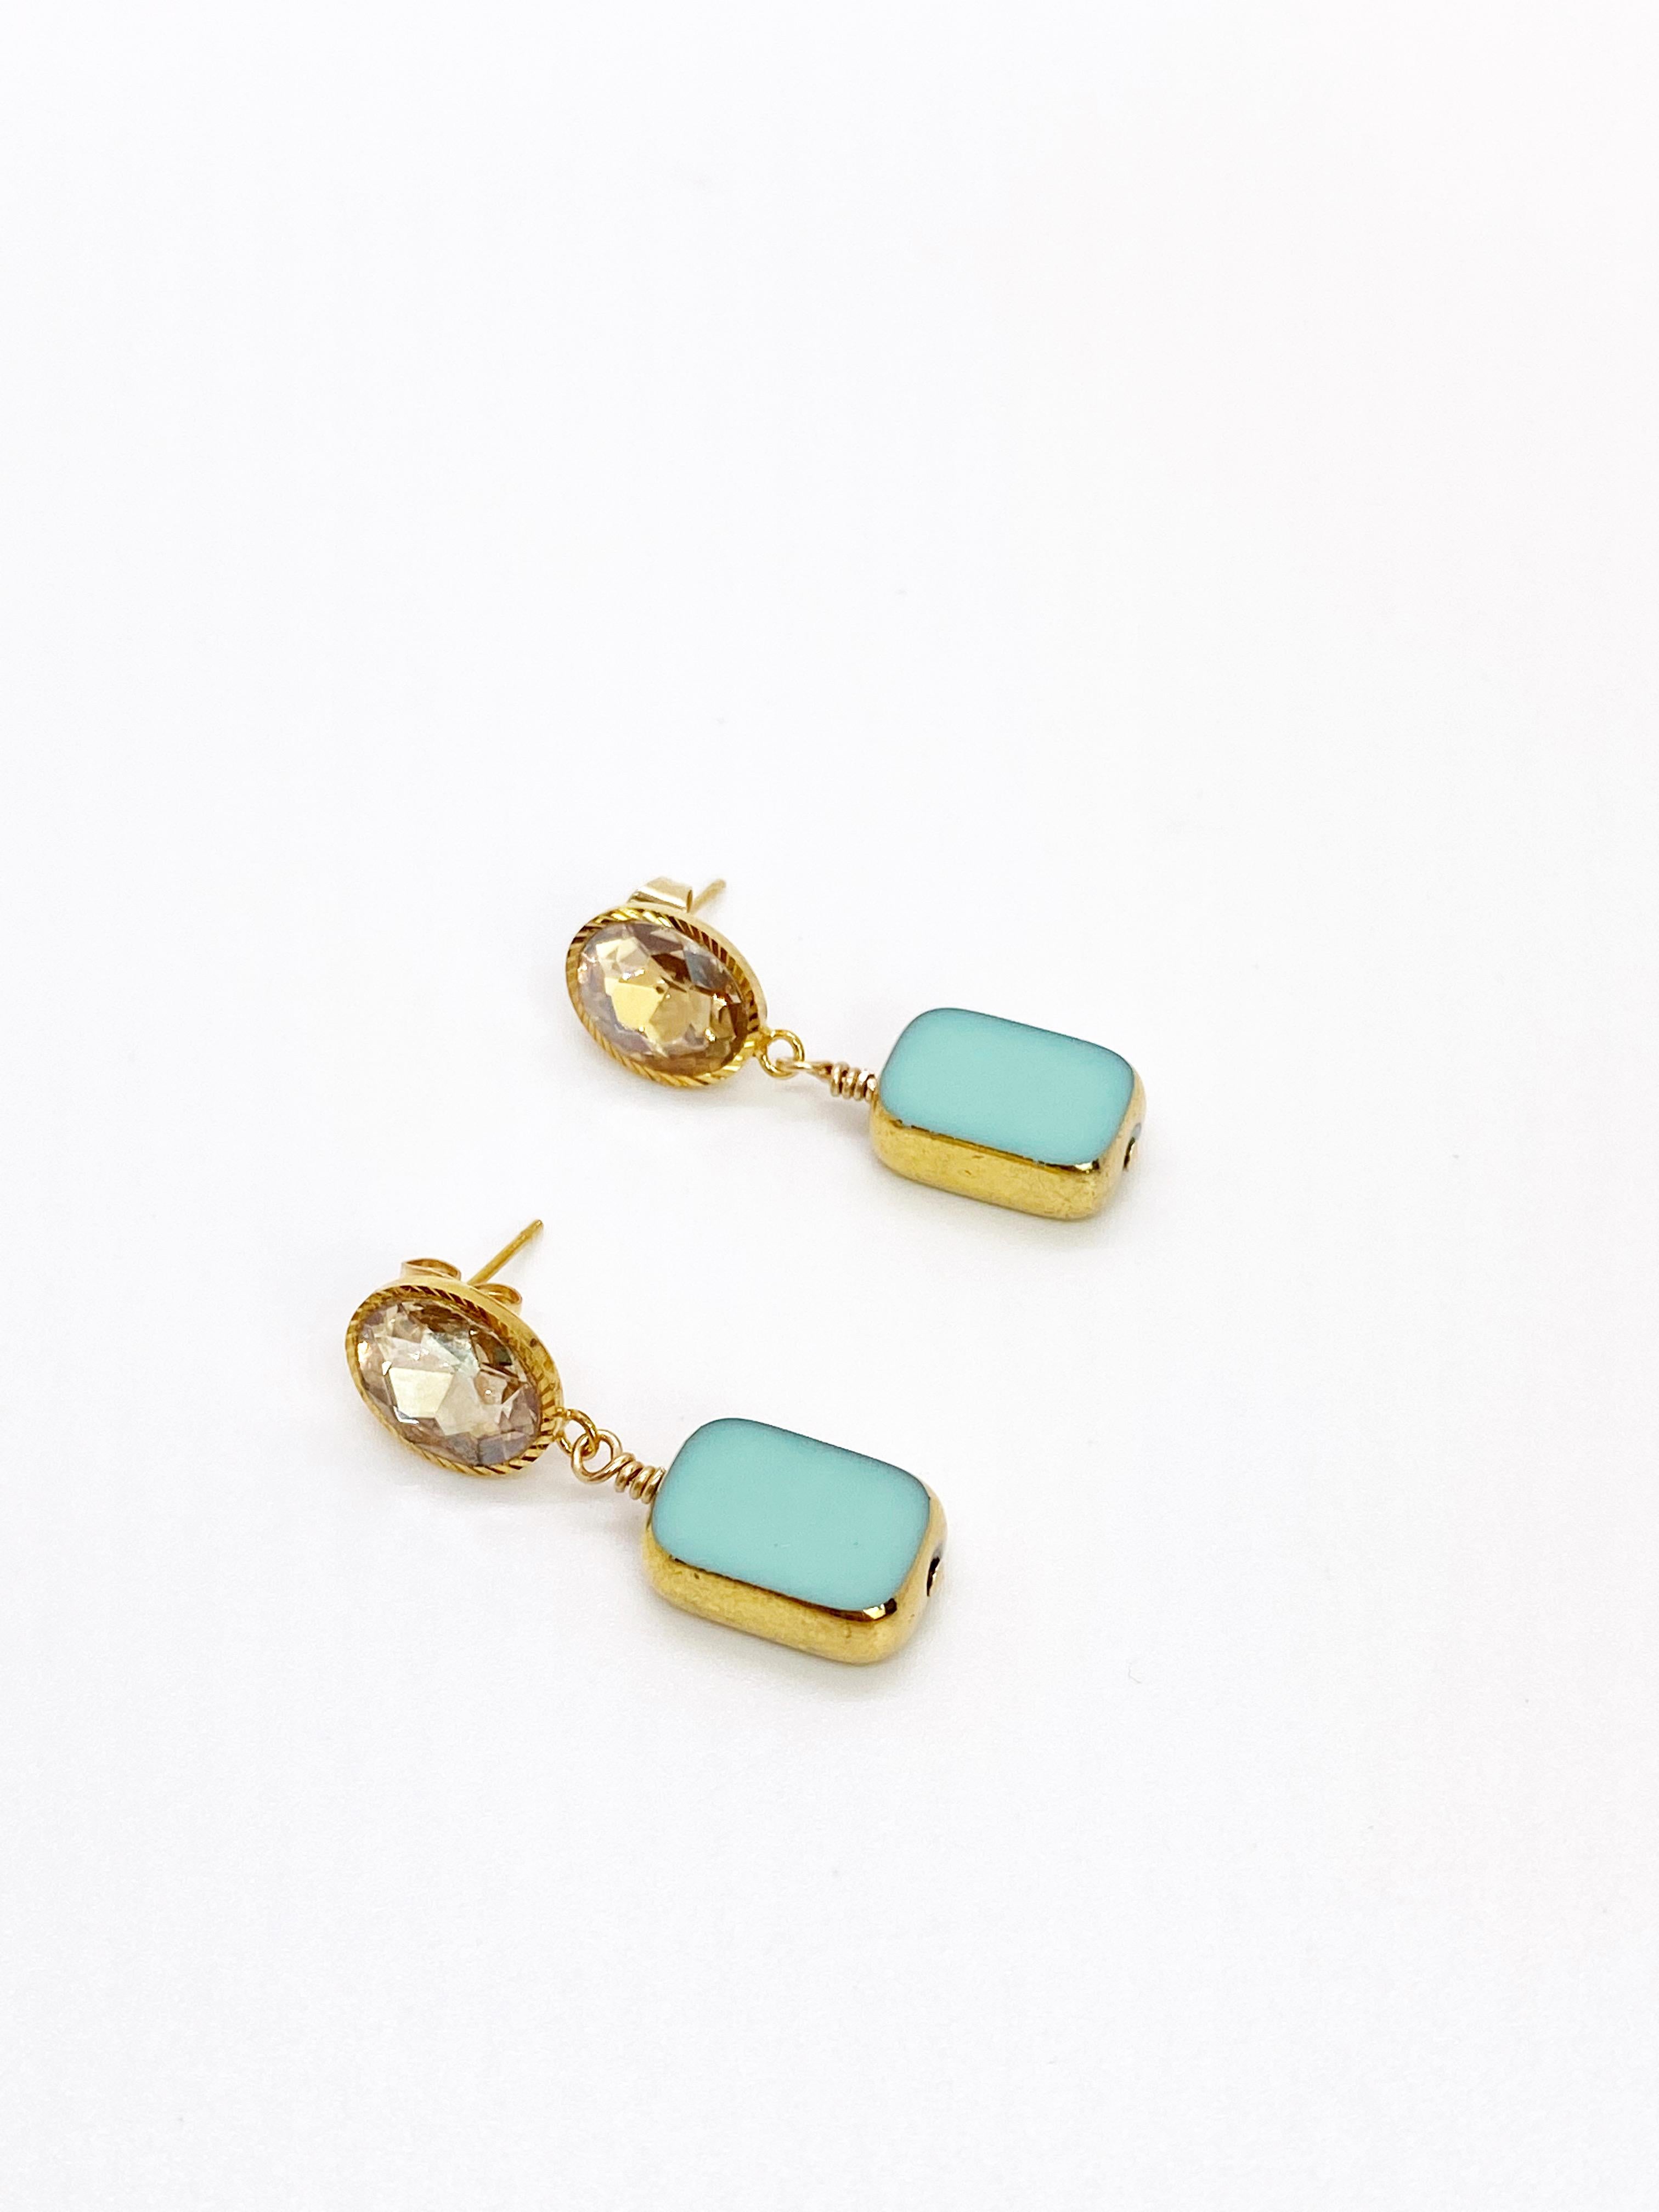 Contemporary Vintage German Glass Beads edged with 24K gold, Sea Foam Green Earrings For Sale